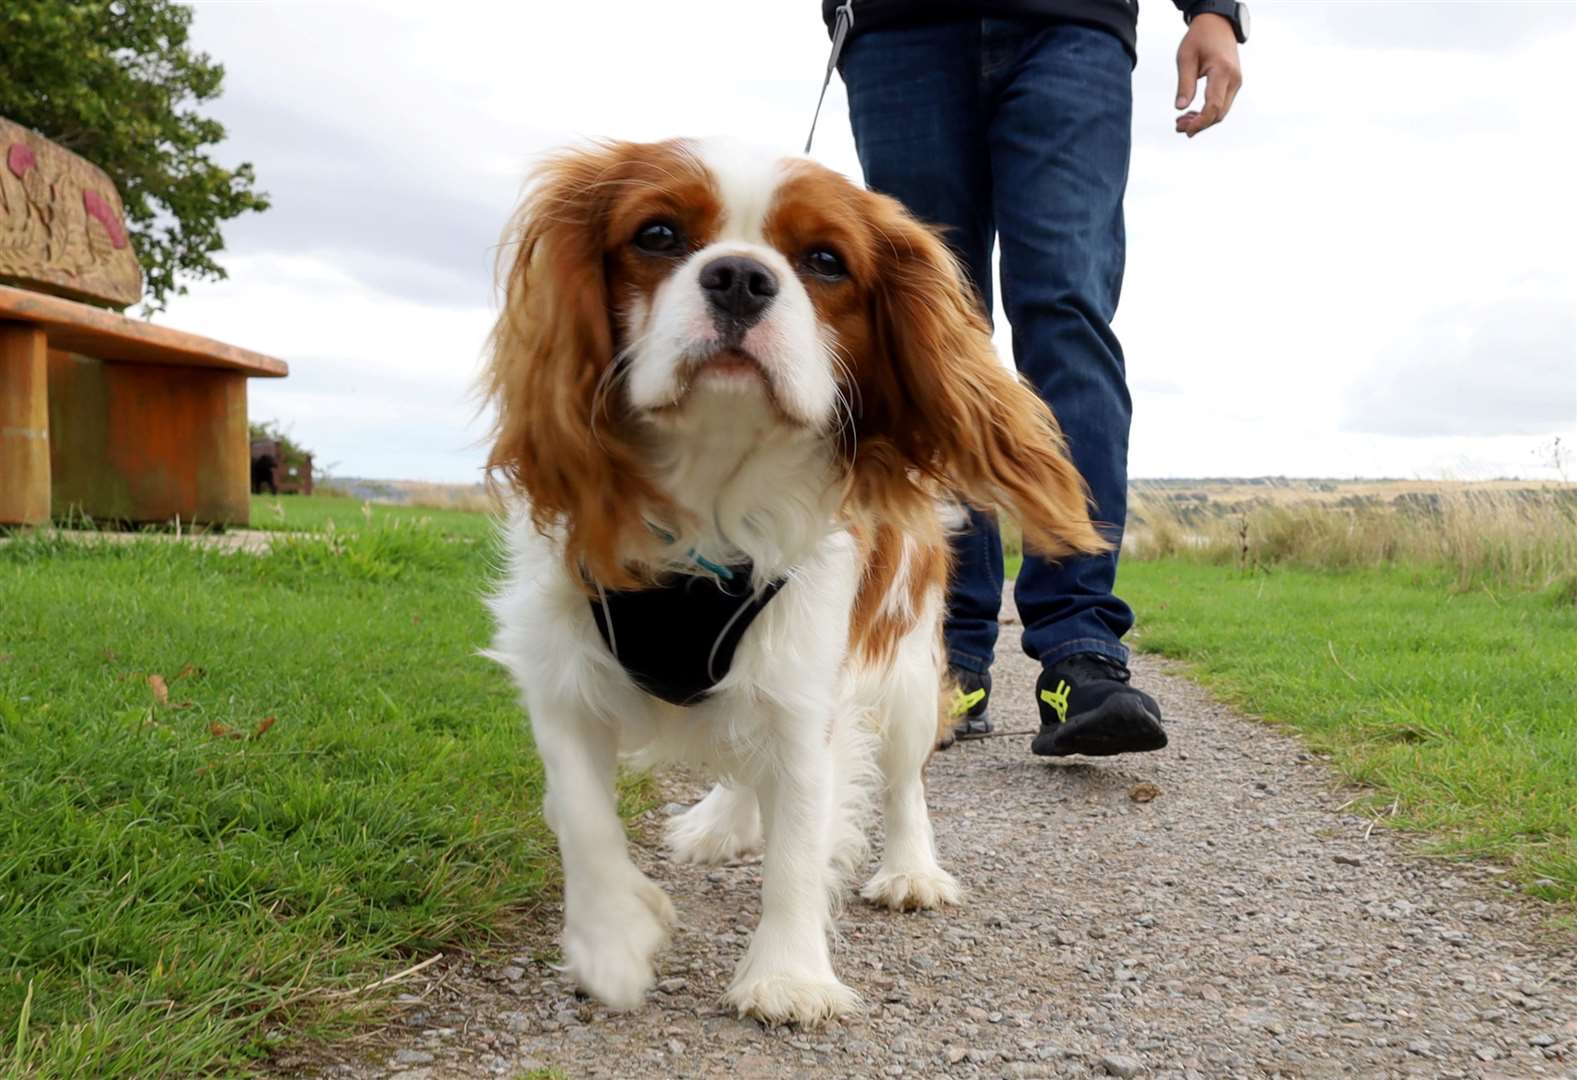 Harley, the Blenheim Cavalier King Charles Spaniel, will take part in a meet-up this weekend.